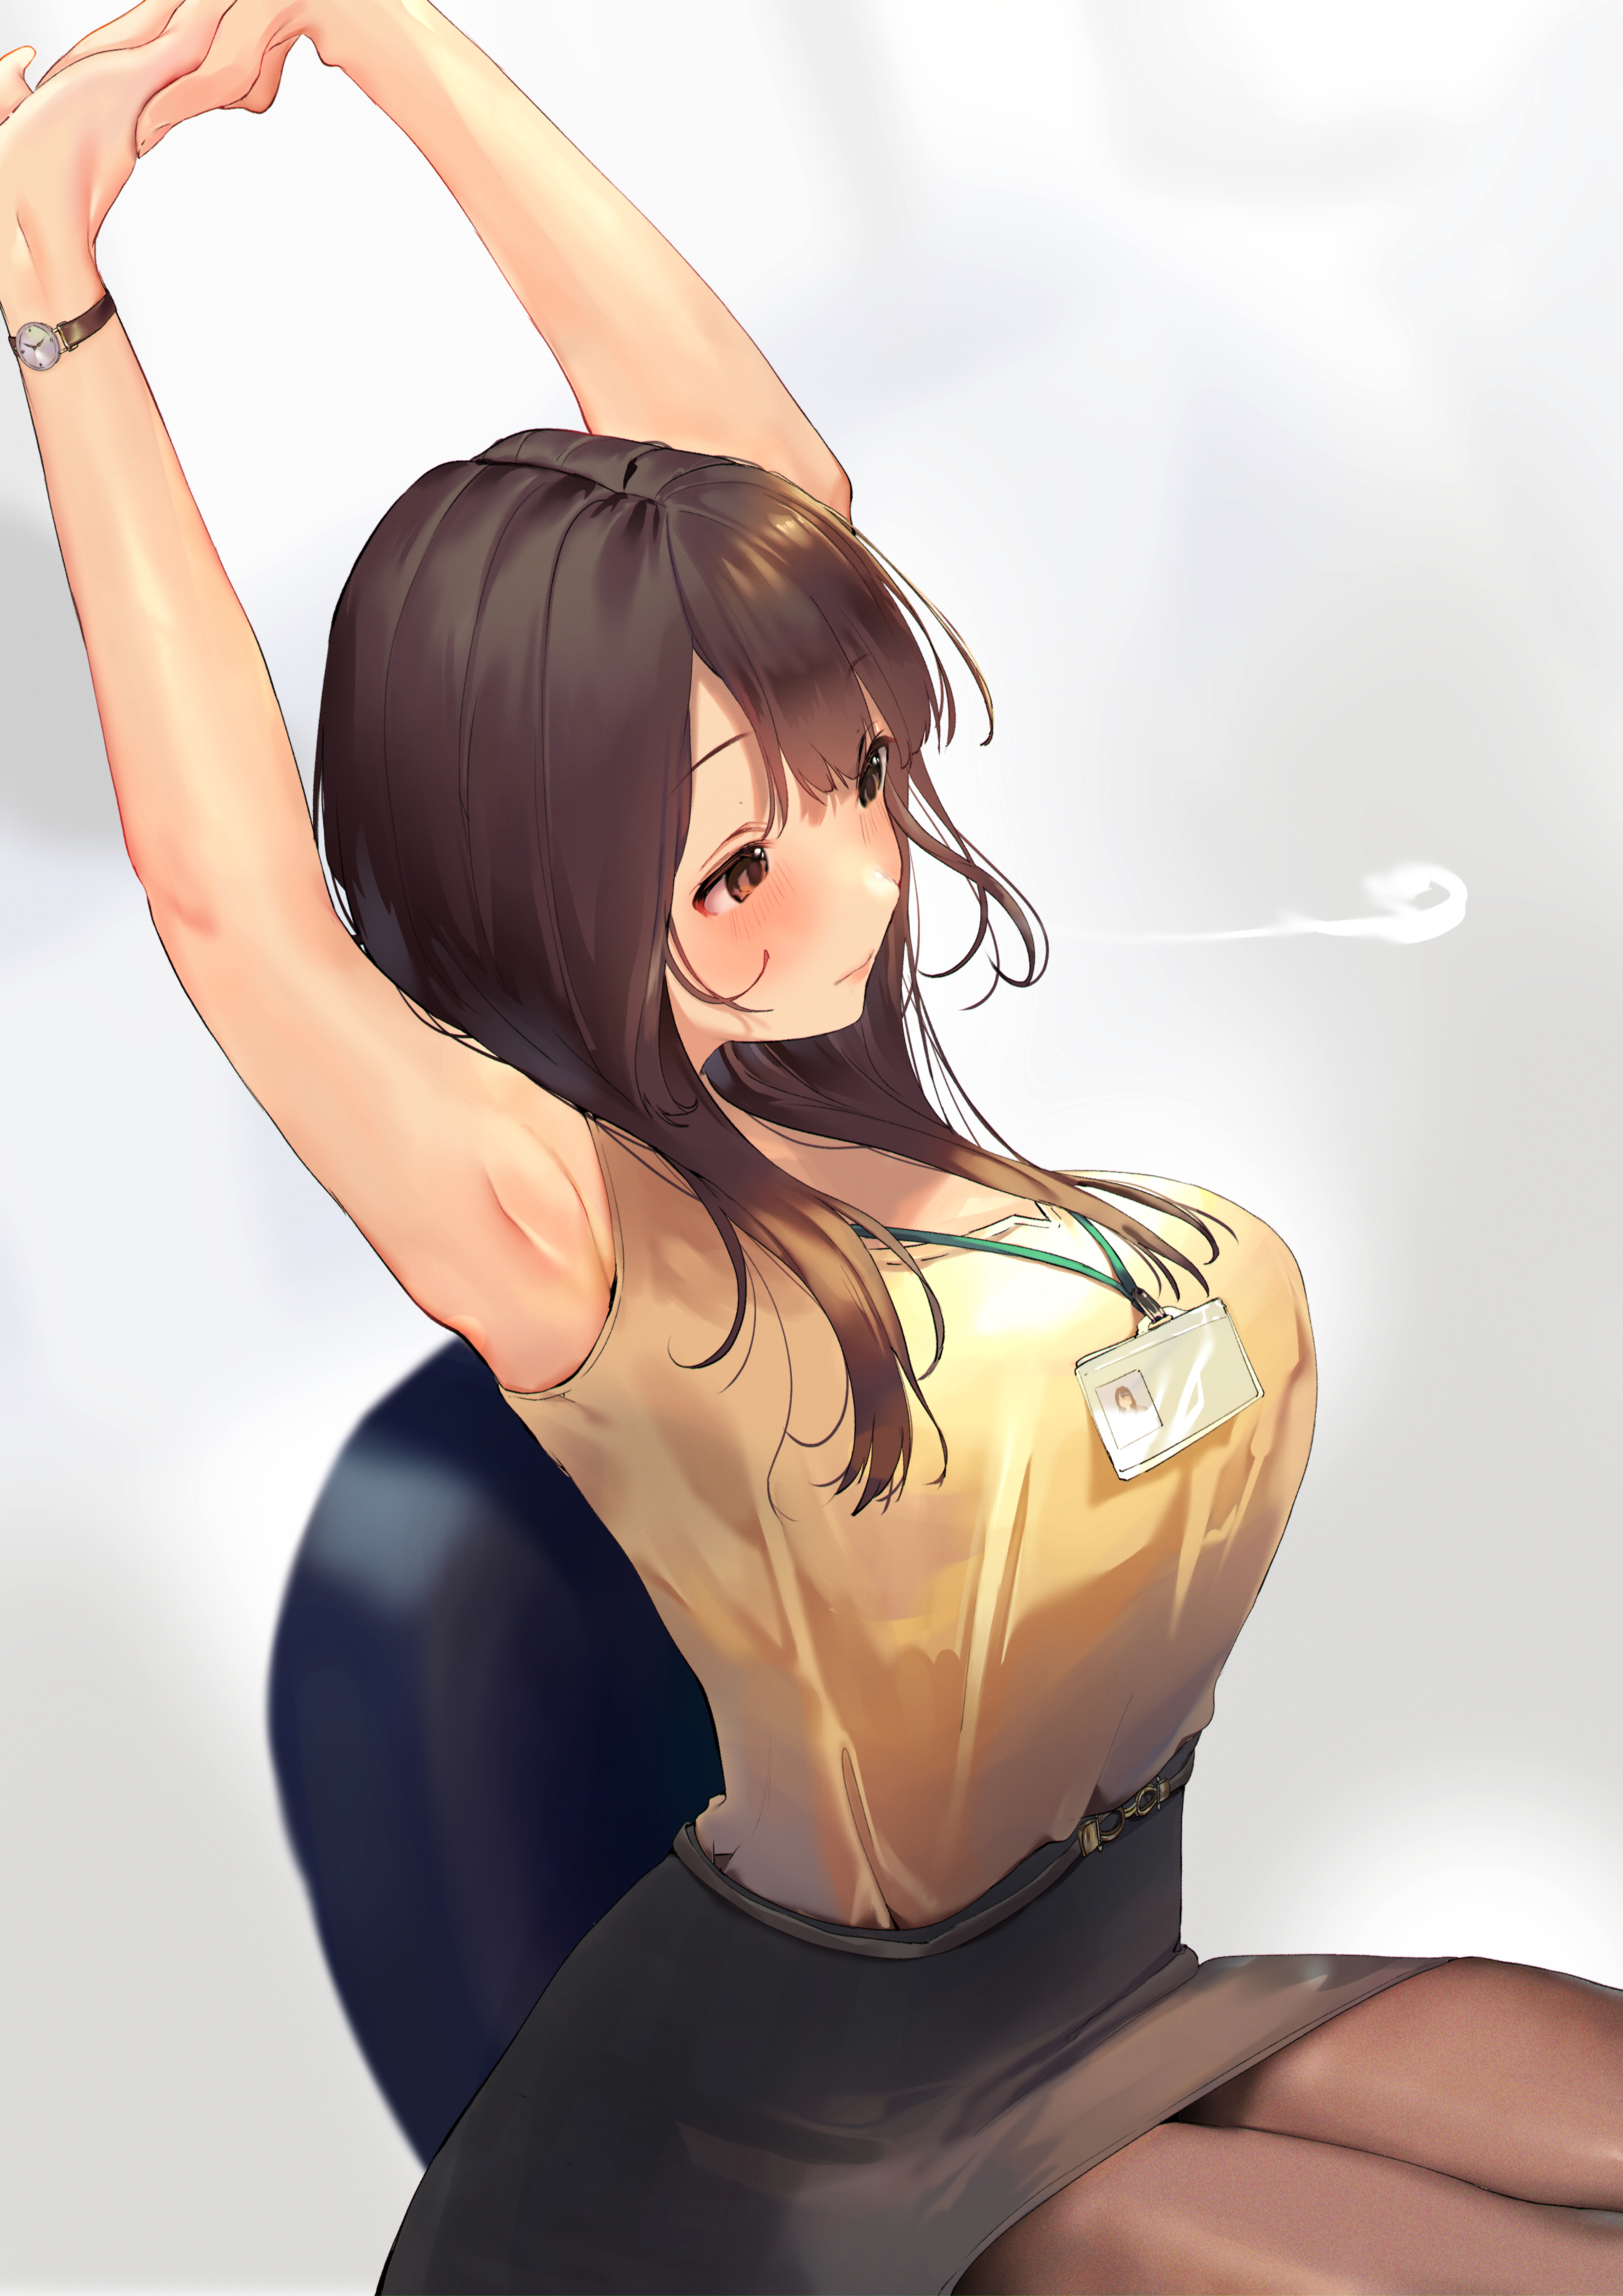 Anime 2894x4093 anime anime girls original characters office girl arms up stretching watch brunette profile blushing brown eyes miniskirt pantyhose simple background portrait display artwork 2D illustration drawing digital art Pixiv armpits